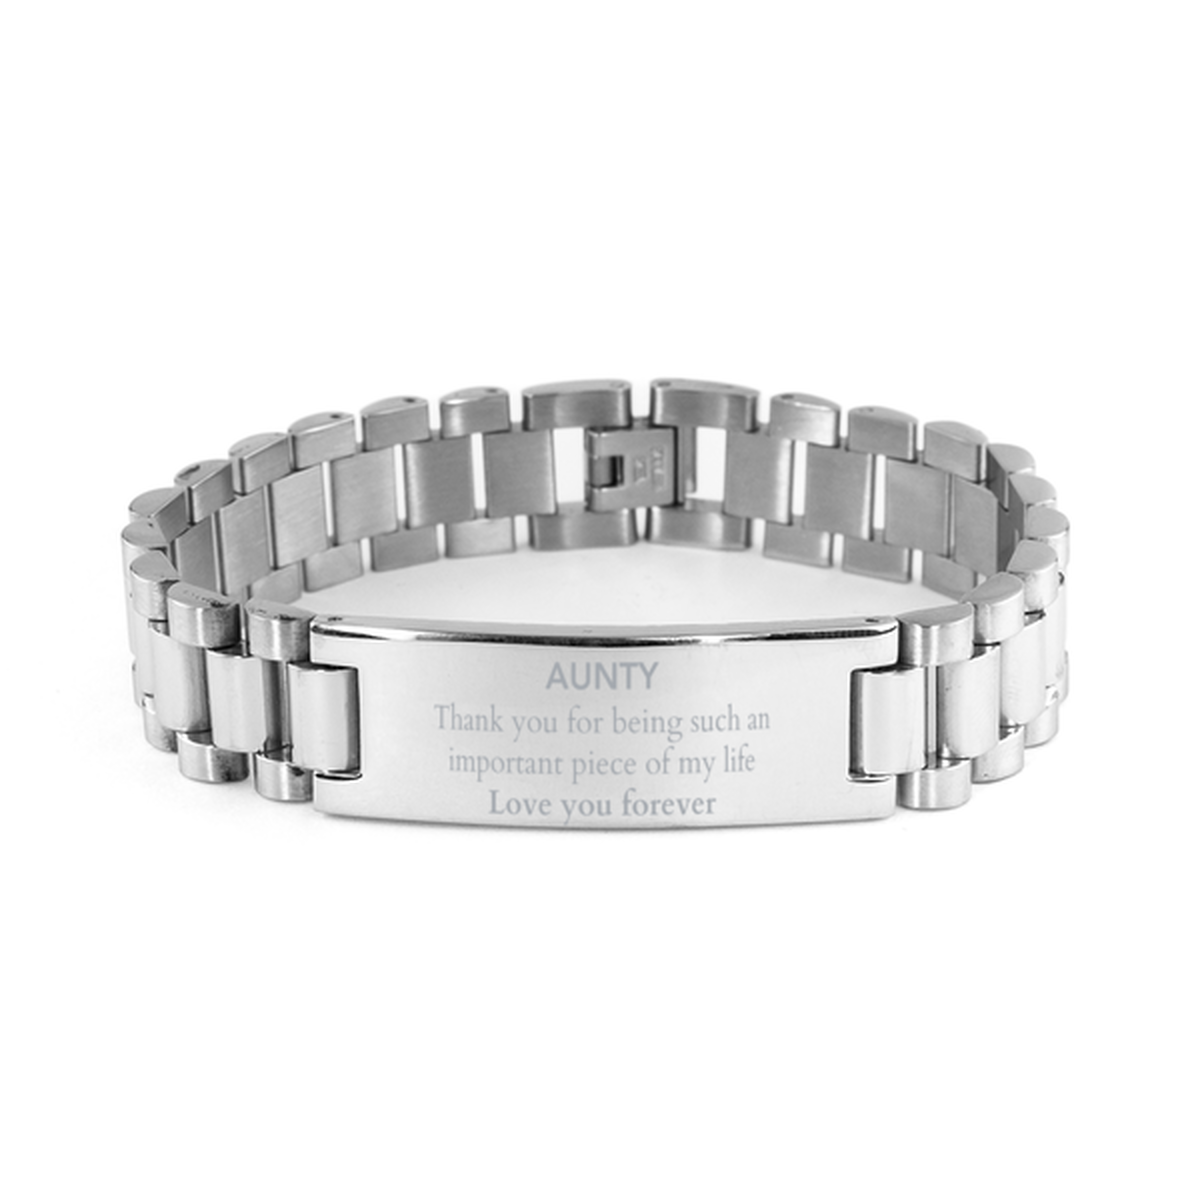 Appropriate Aunty Ladder Stainless Steel Bracelet Epic Birthday Gifts for Aunty Thank you for being such an important piece of my life Aunty Christmas Mothers Fathers Day